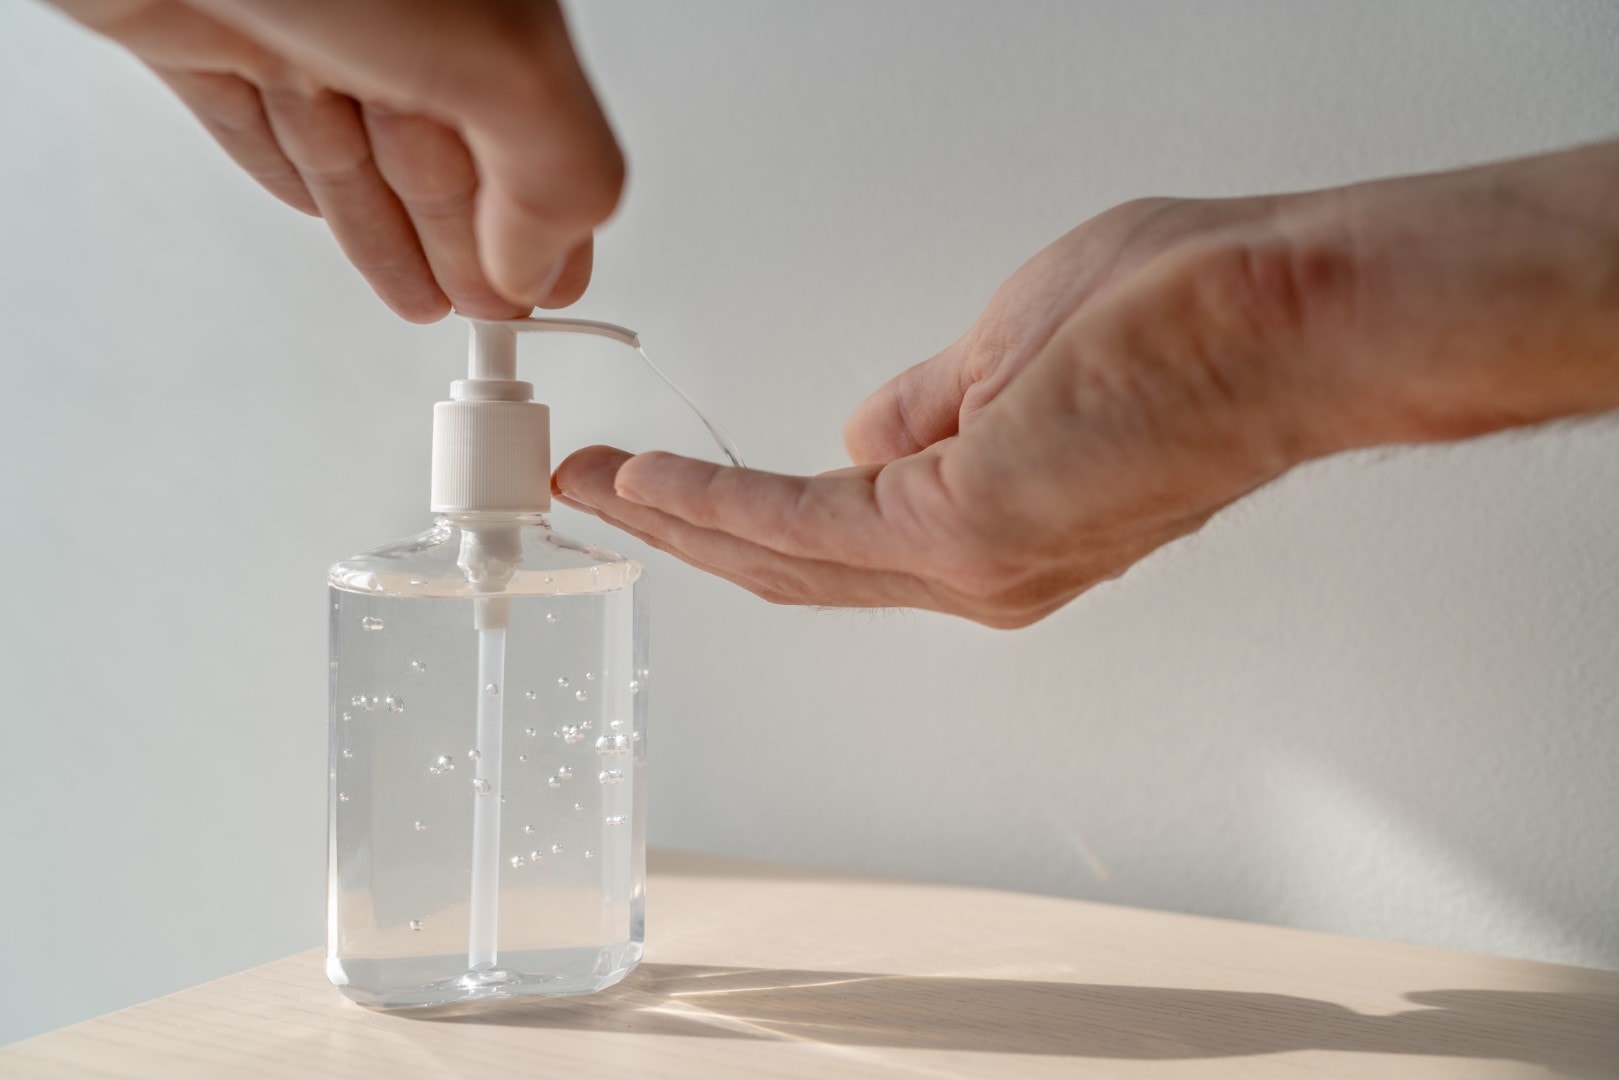 Man using hand sanitizer alcohol gel rub for hands hygiene at home or public space, hospital clinic for preventive coronavirus spread epidemic prevention.